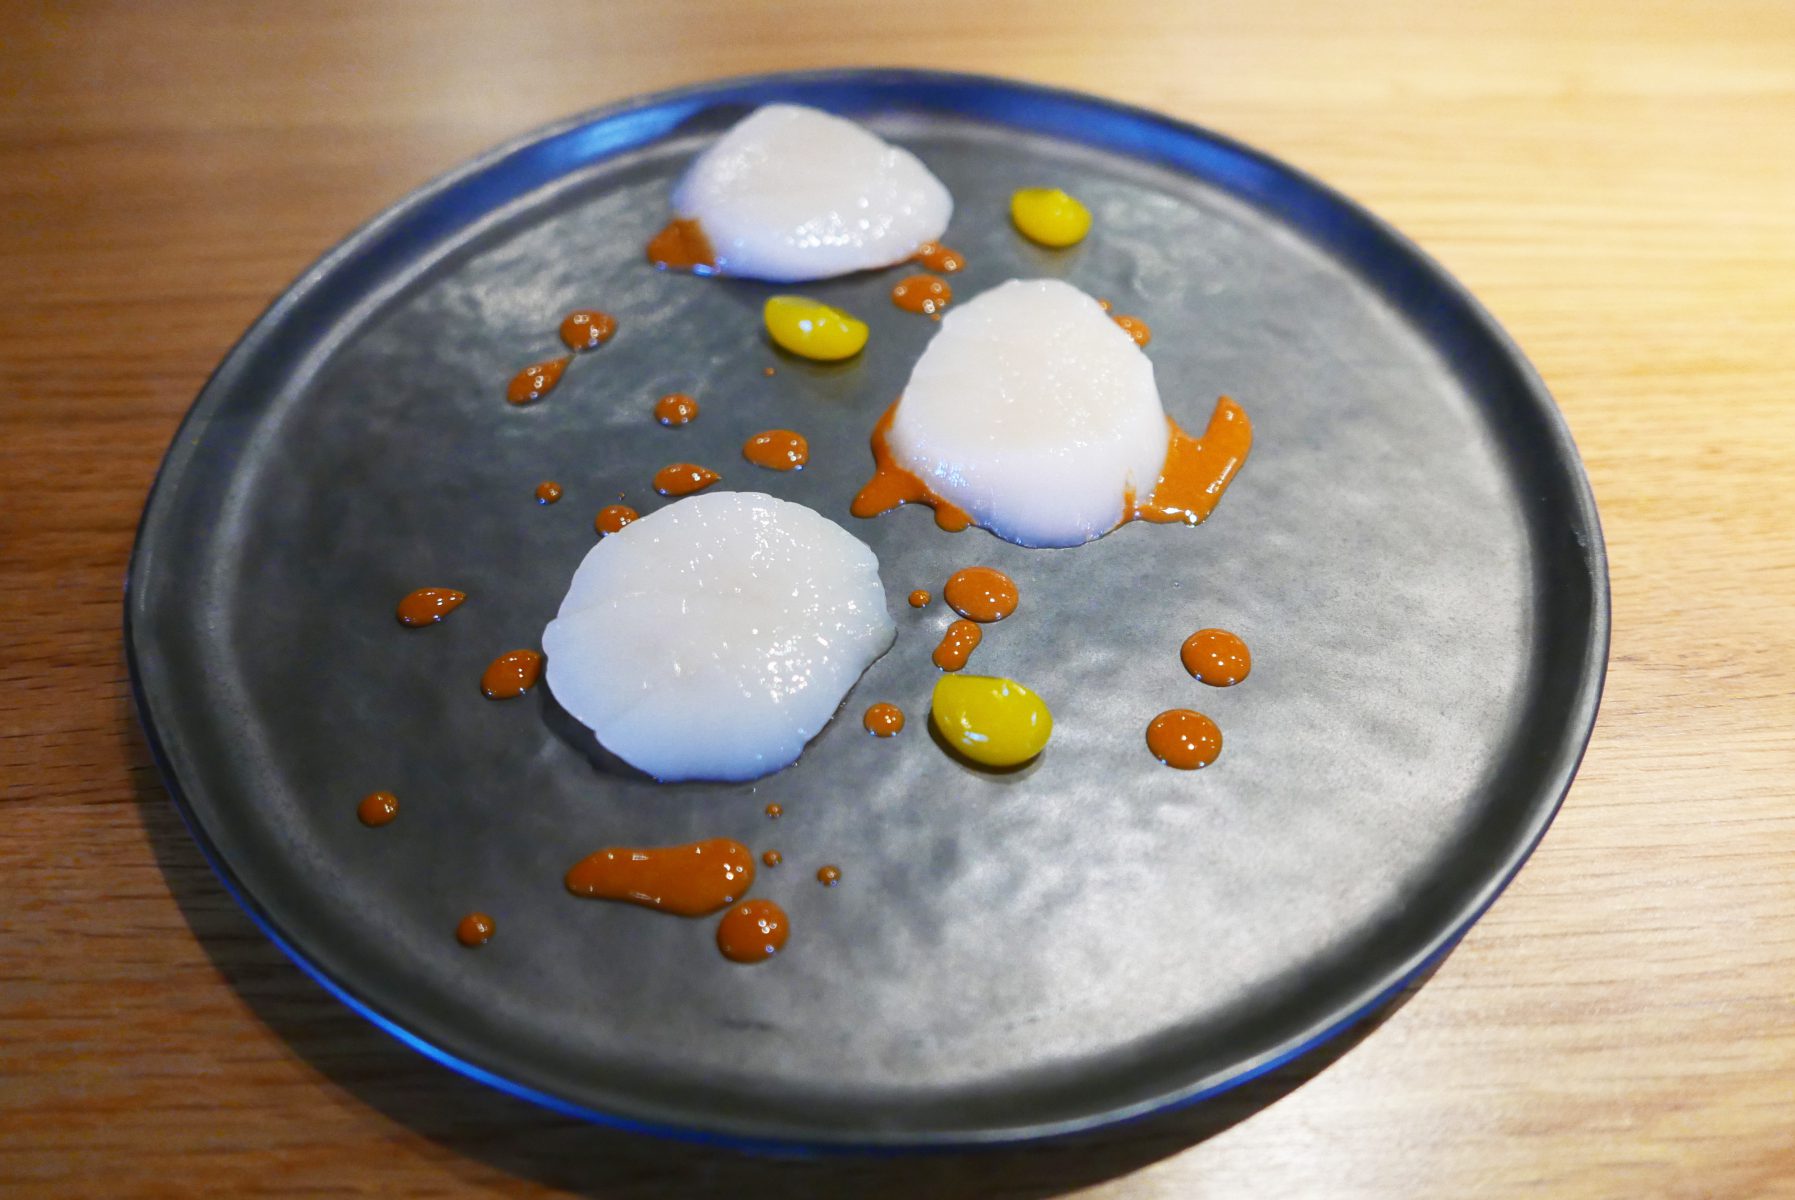 Live scallops from Isle of Mull ( still moving when touched with a fork) with sea urchin and coffee cream,shiro dashi. Mikael always outsources the best scallops one can get.